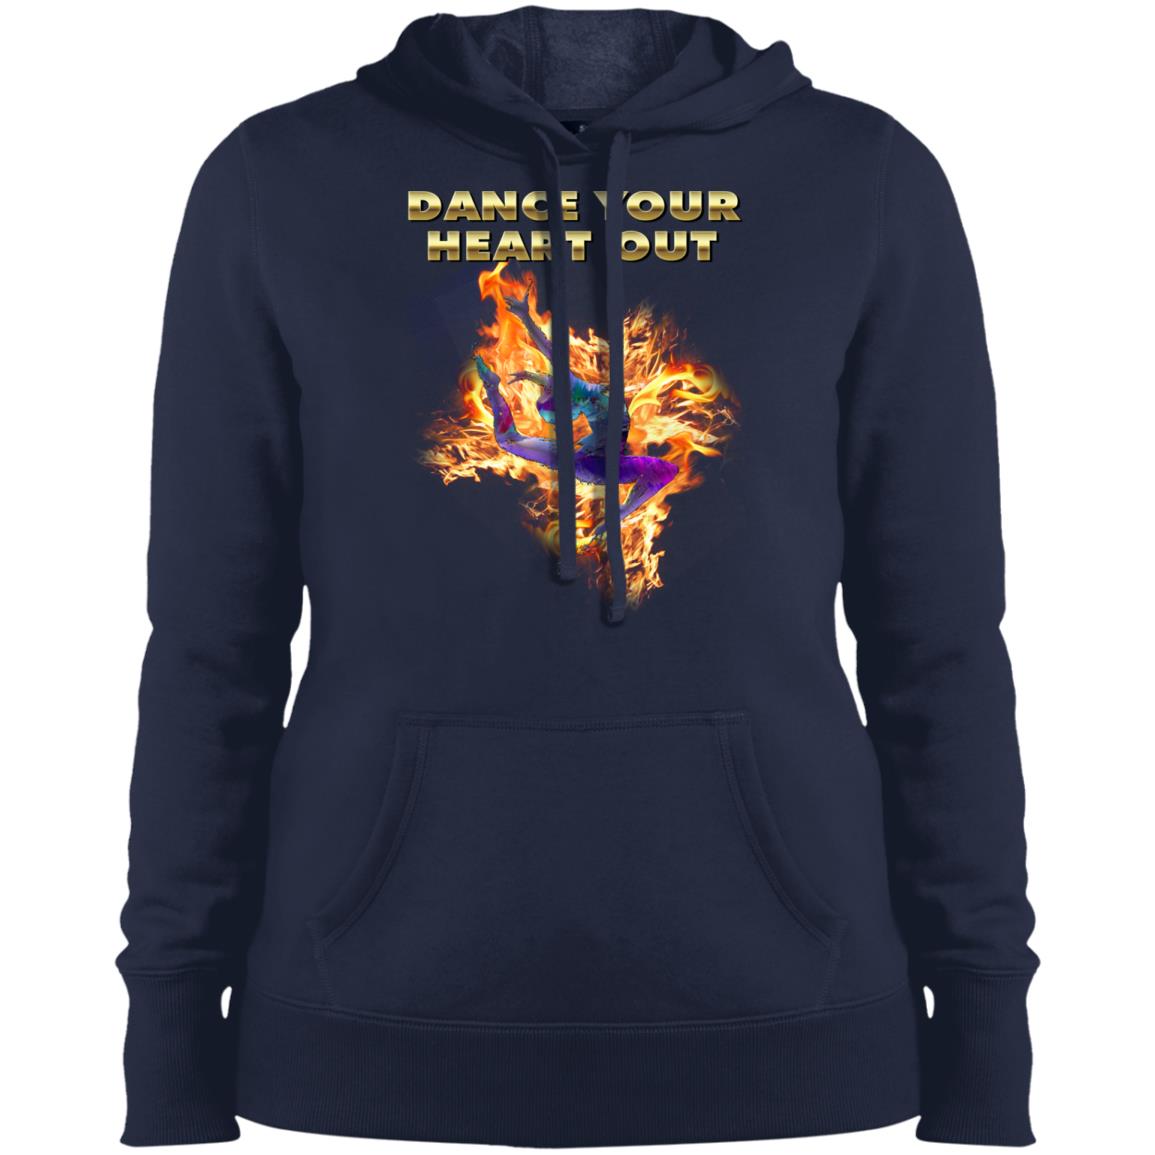 Dance your Heart Out-1 LST254 Ladies' Pullover Hooded Sweatshirt